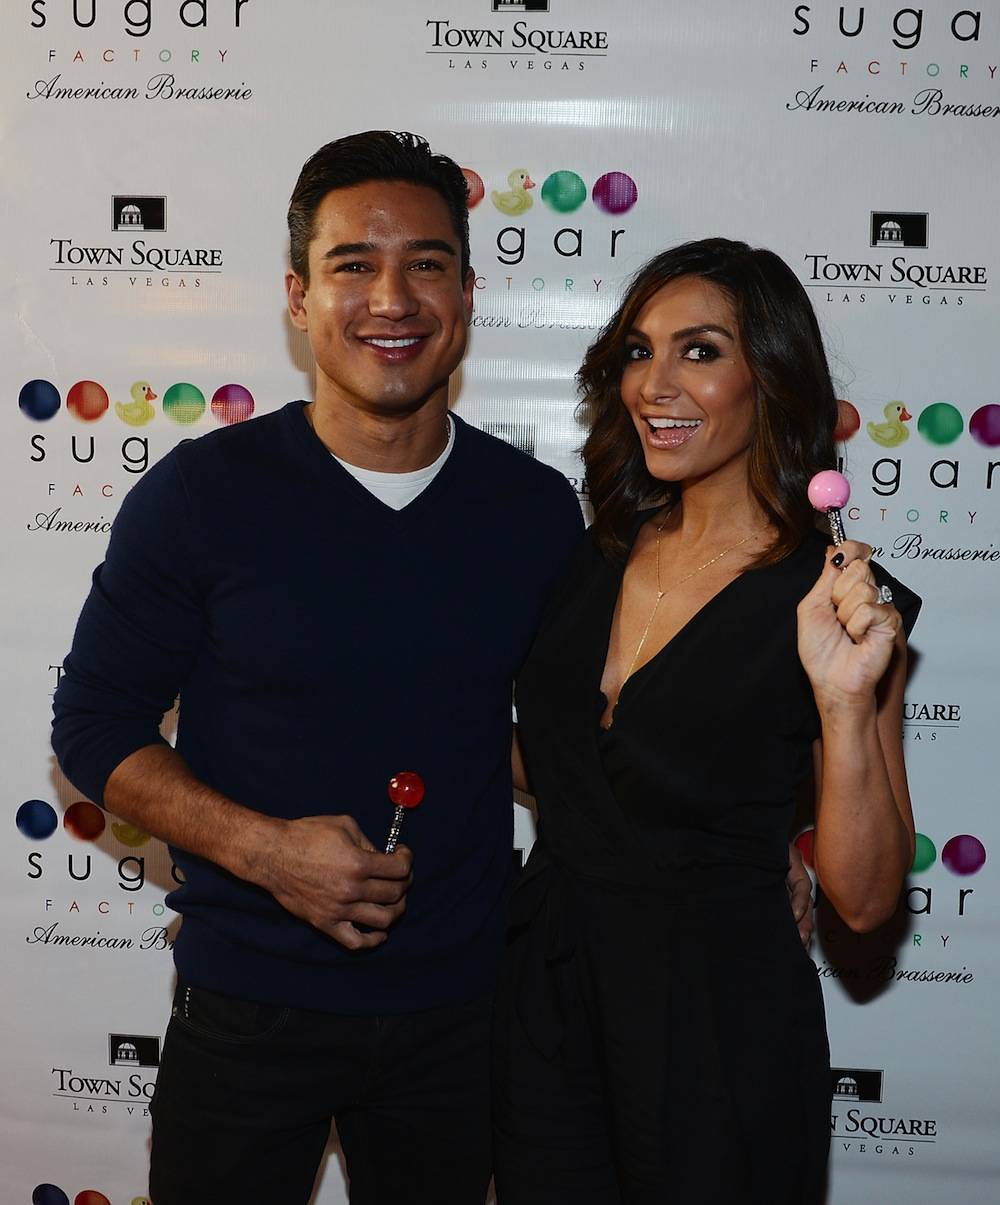 Mario Lopez And The Bella Twins Celebrate Sugar Factory's Grand Opening At Town Square Las Vegas